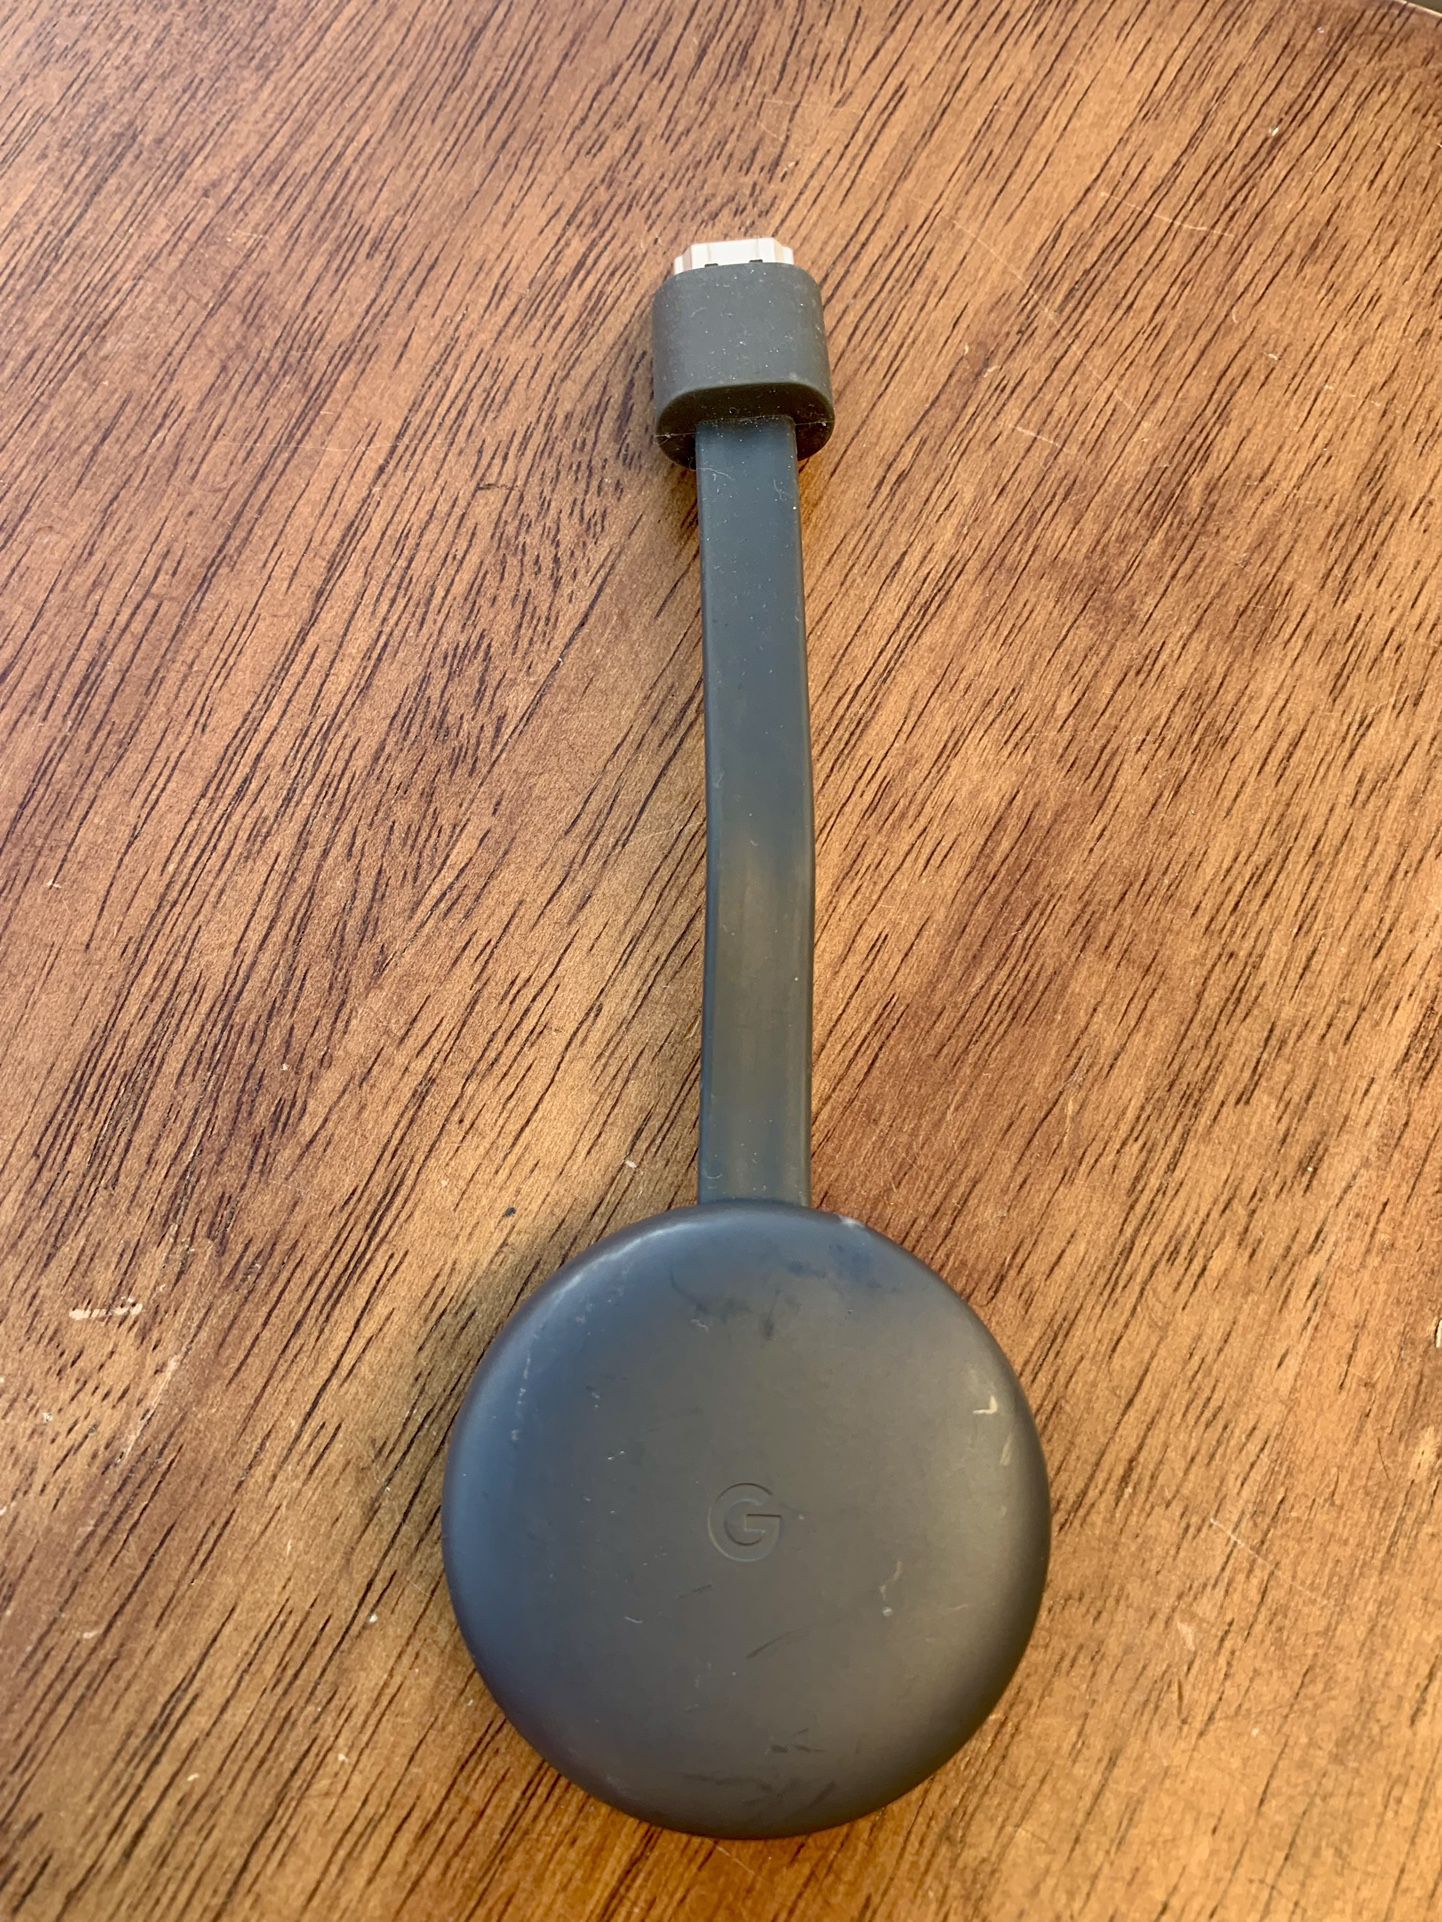 Google Chromecast - Streaming Device with HDMI Cable - Stream Shows, Music, Photos, and Sports from Your Phone to Your TV with Microfiber Cloth and Tr